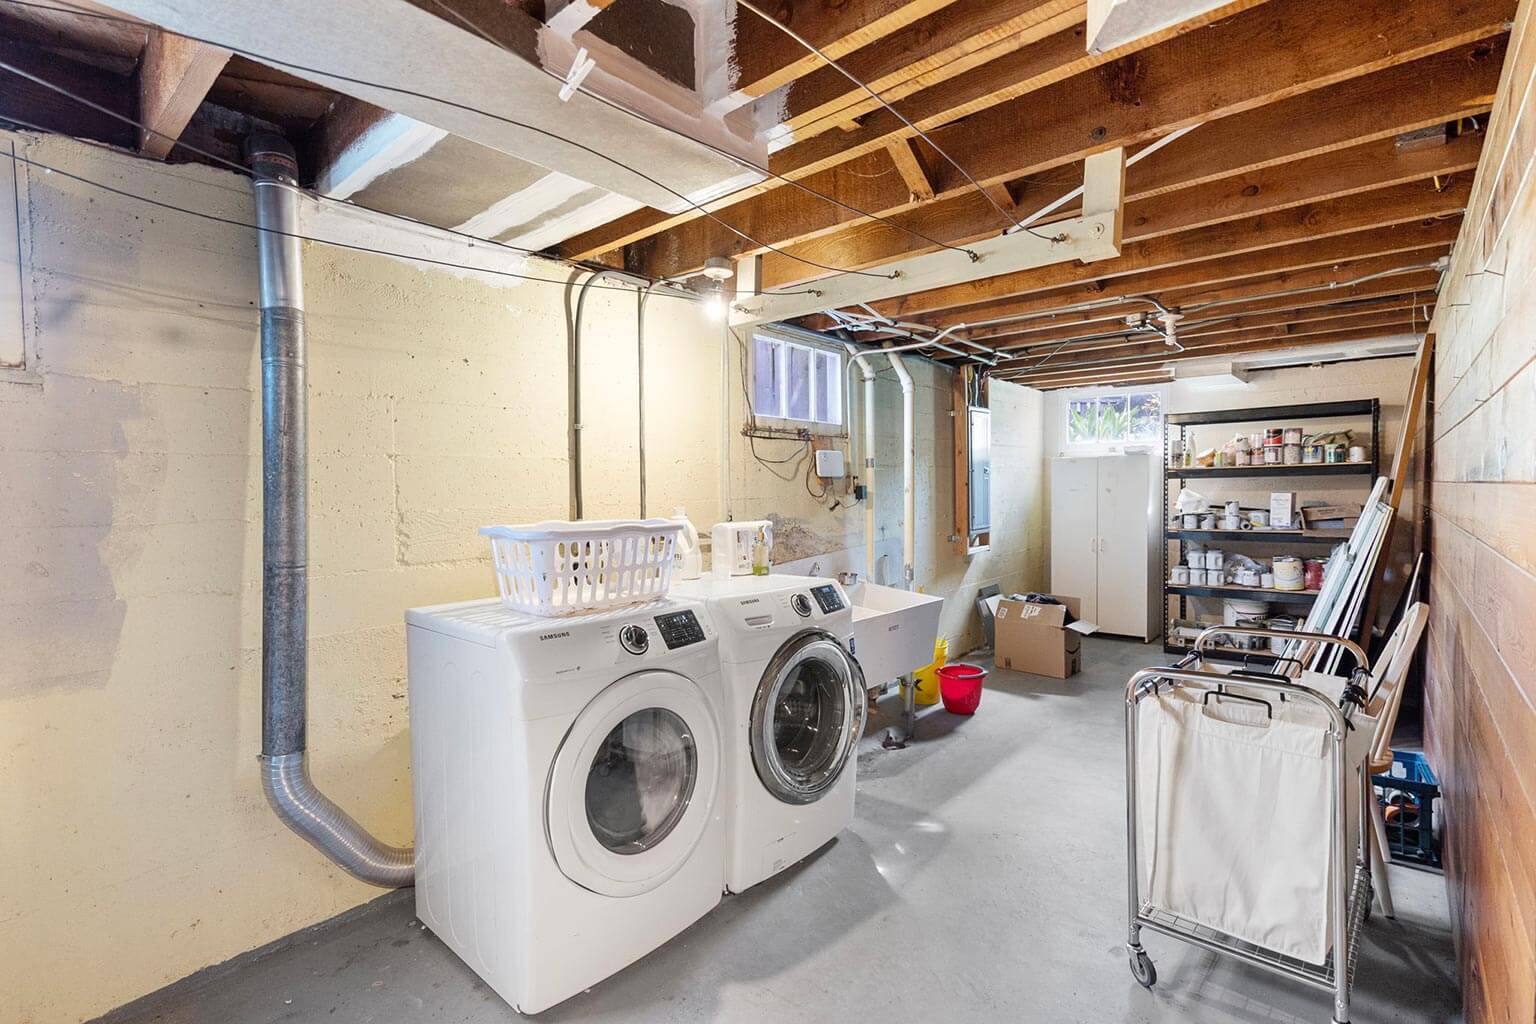 Basement laundry (washer and dryer included)